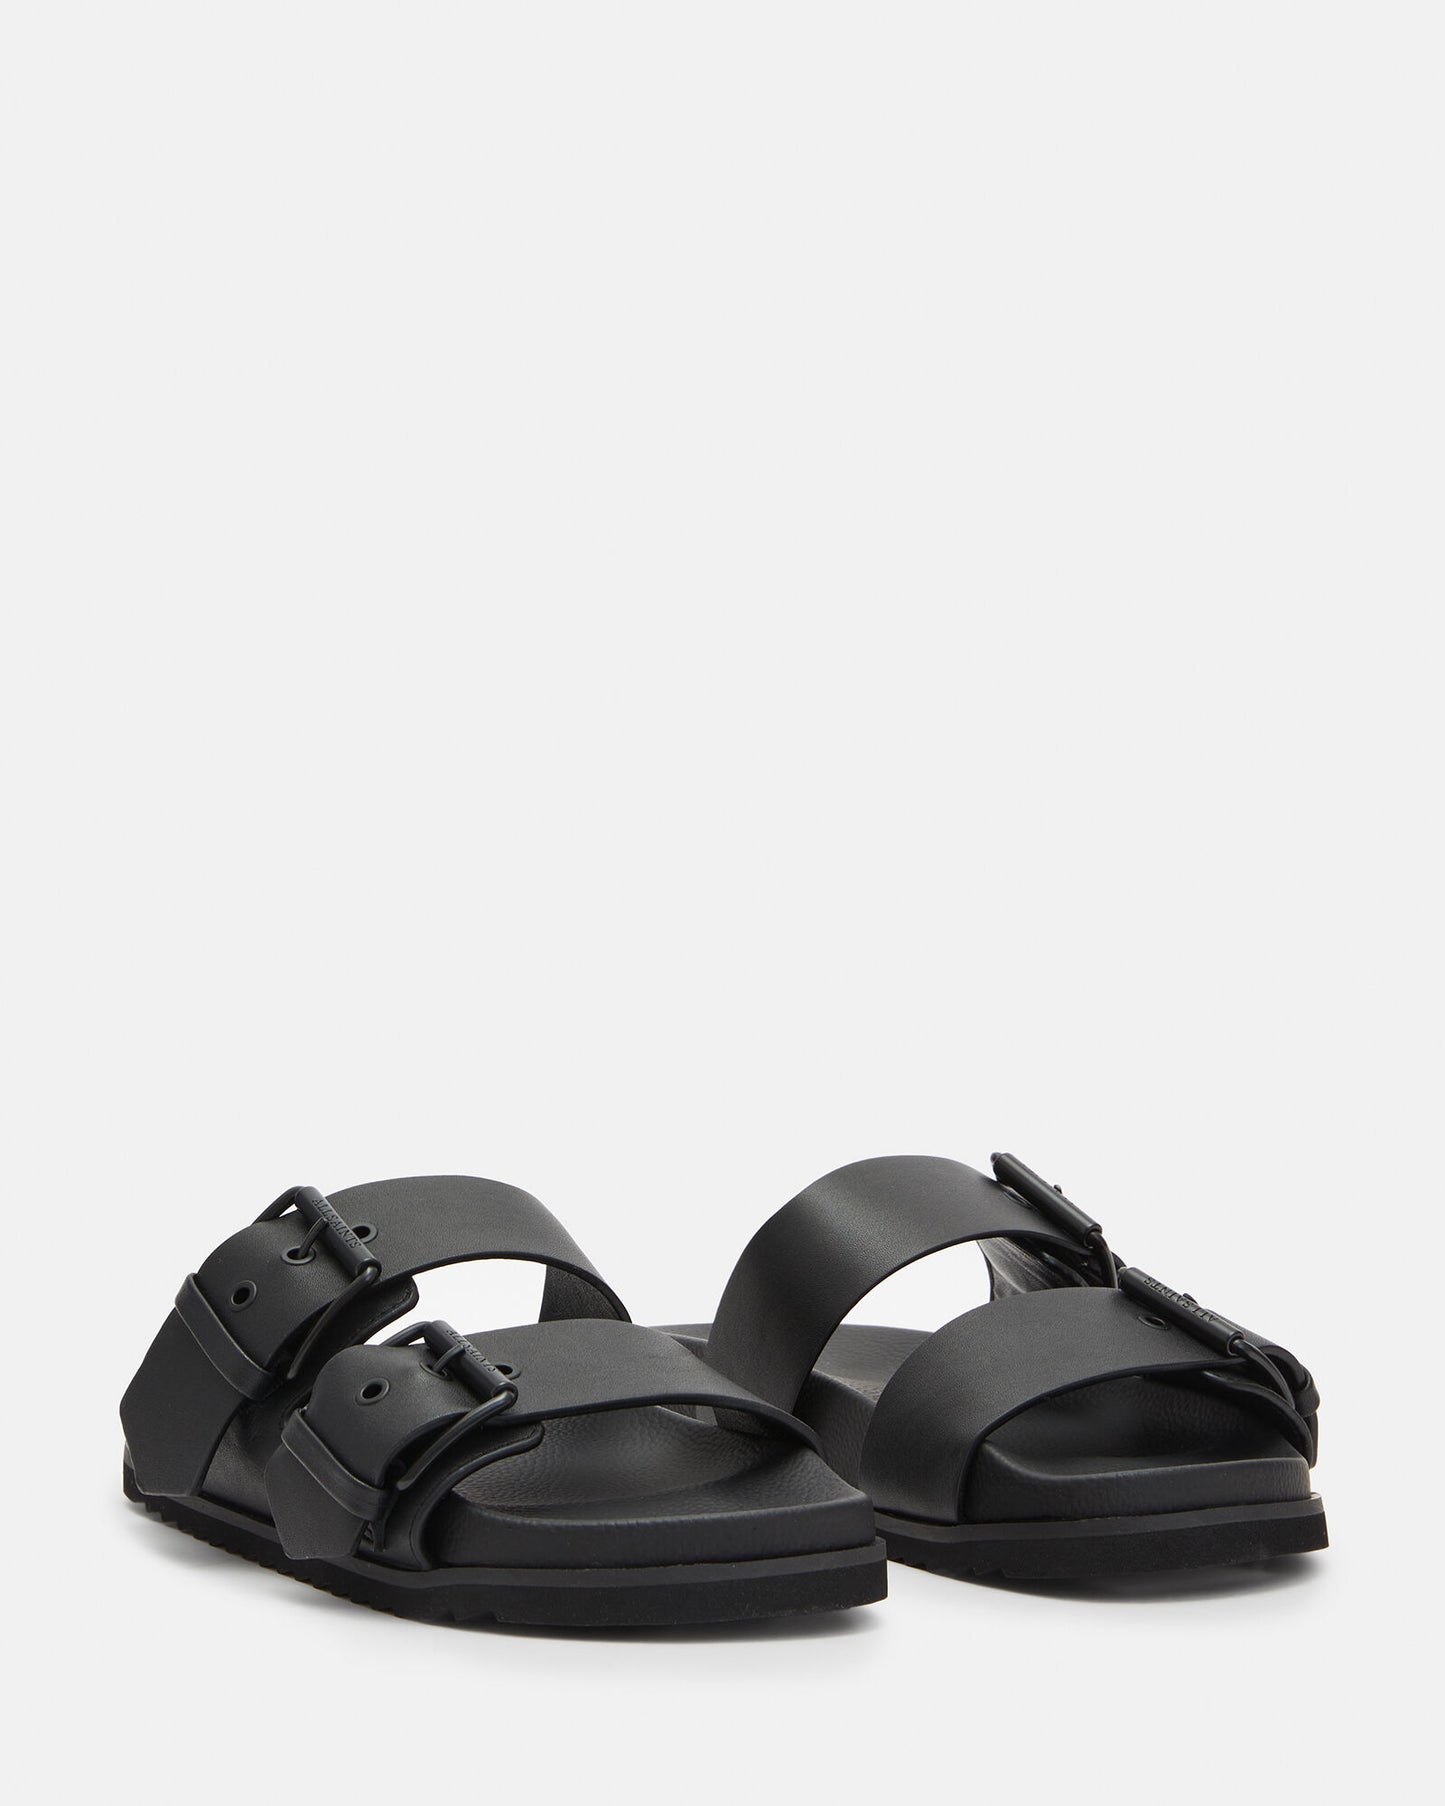 Sian Leather Sandals